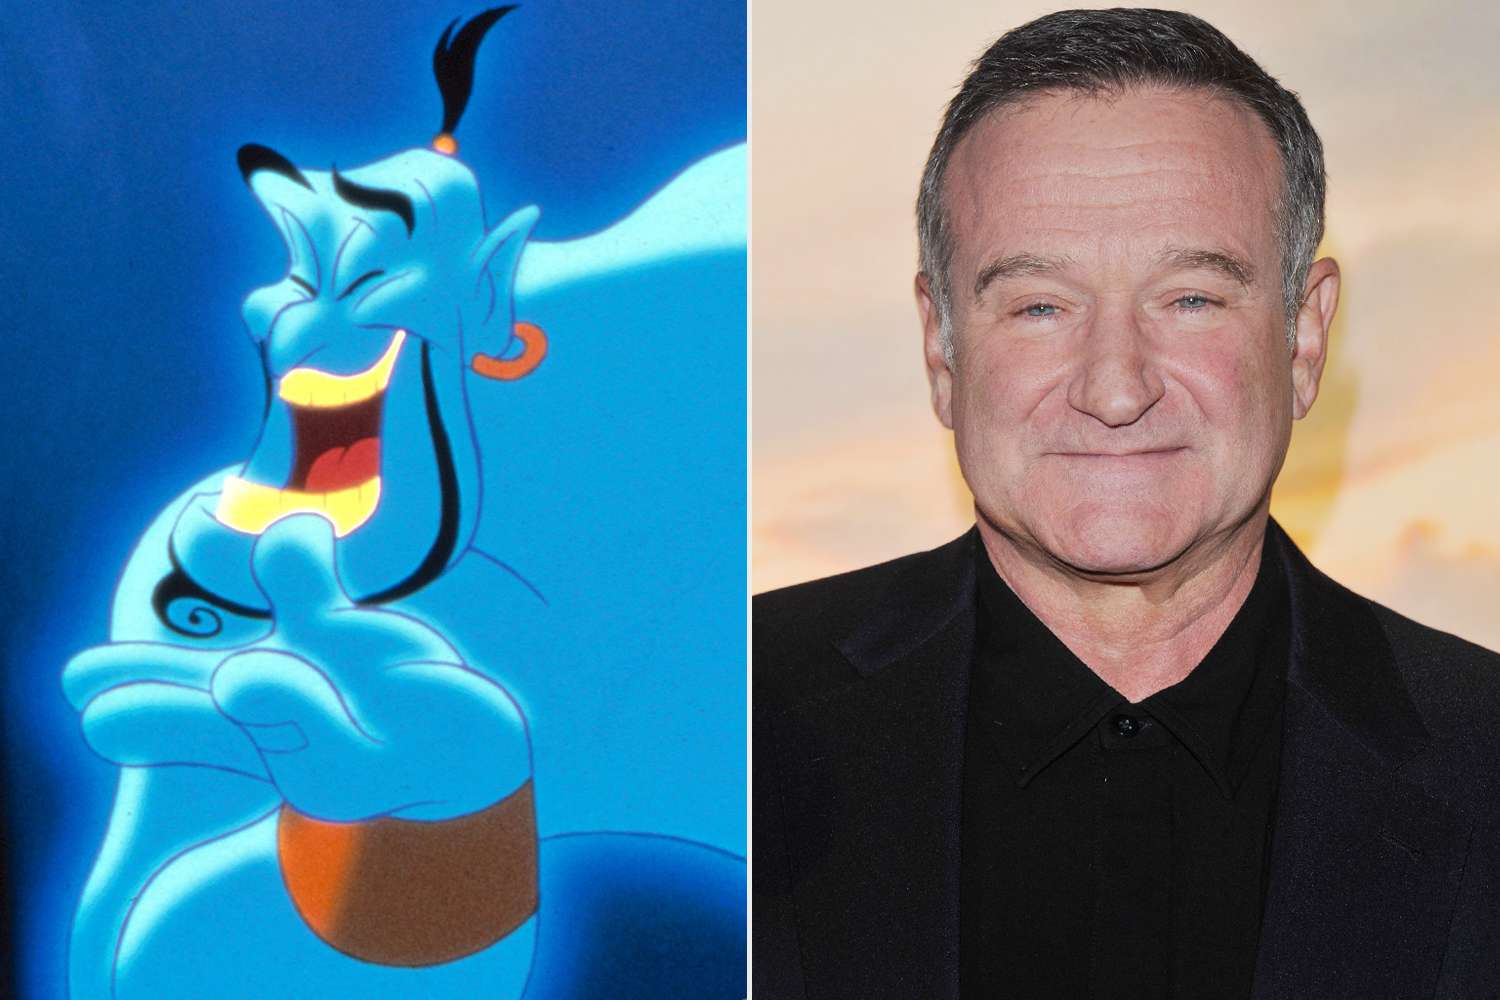 Robin Williams’ Genie Voice Featured In “Once Upon A Studio” Short Film